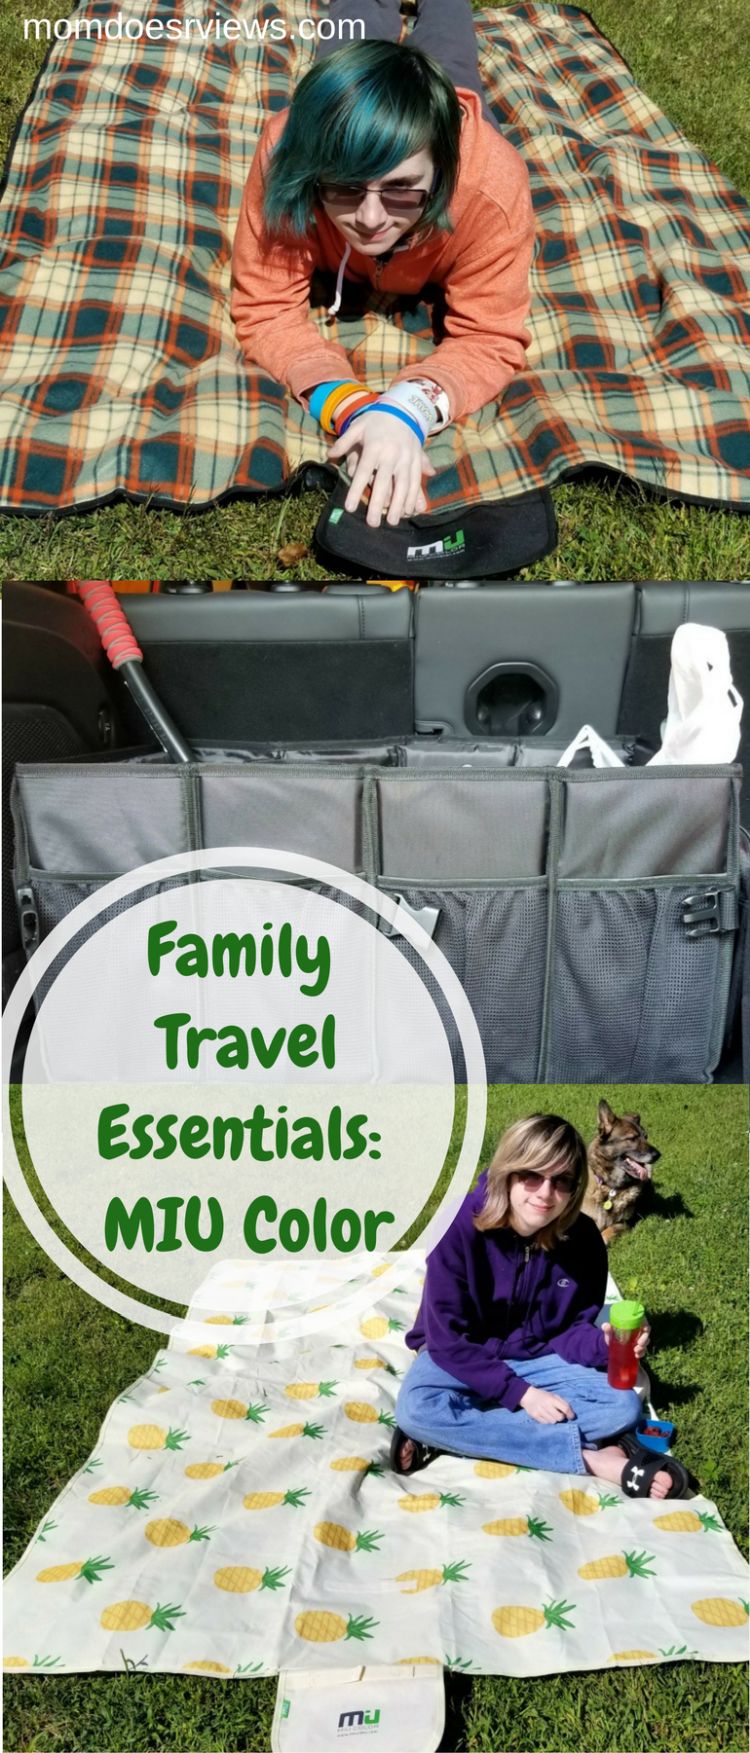 Fun Family Travel Essentials from MIU Color